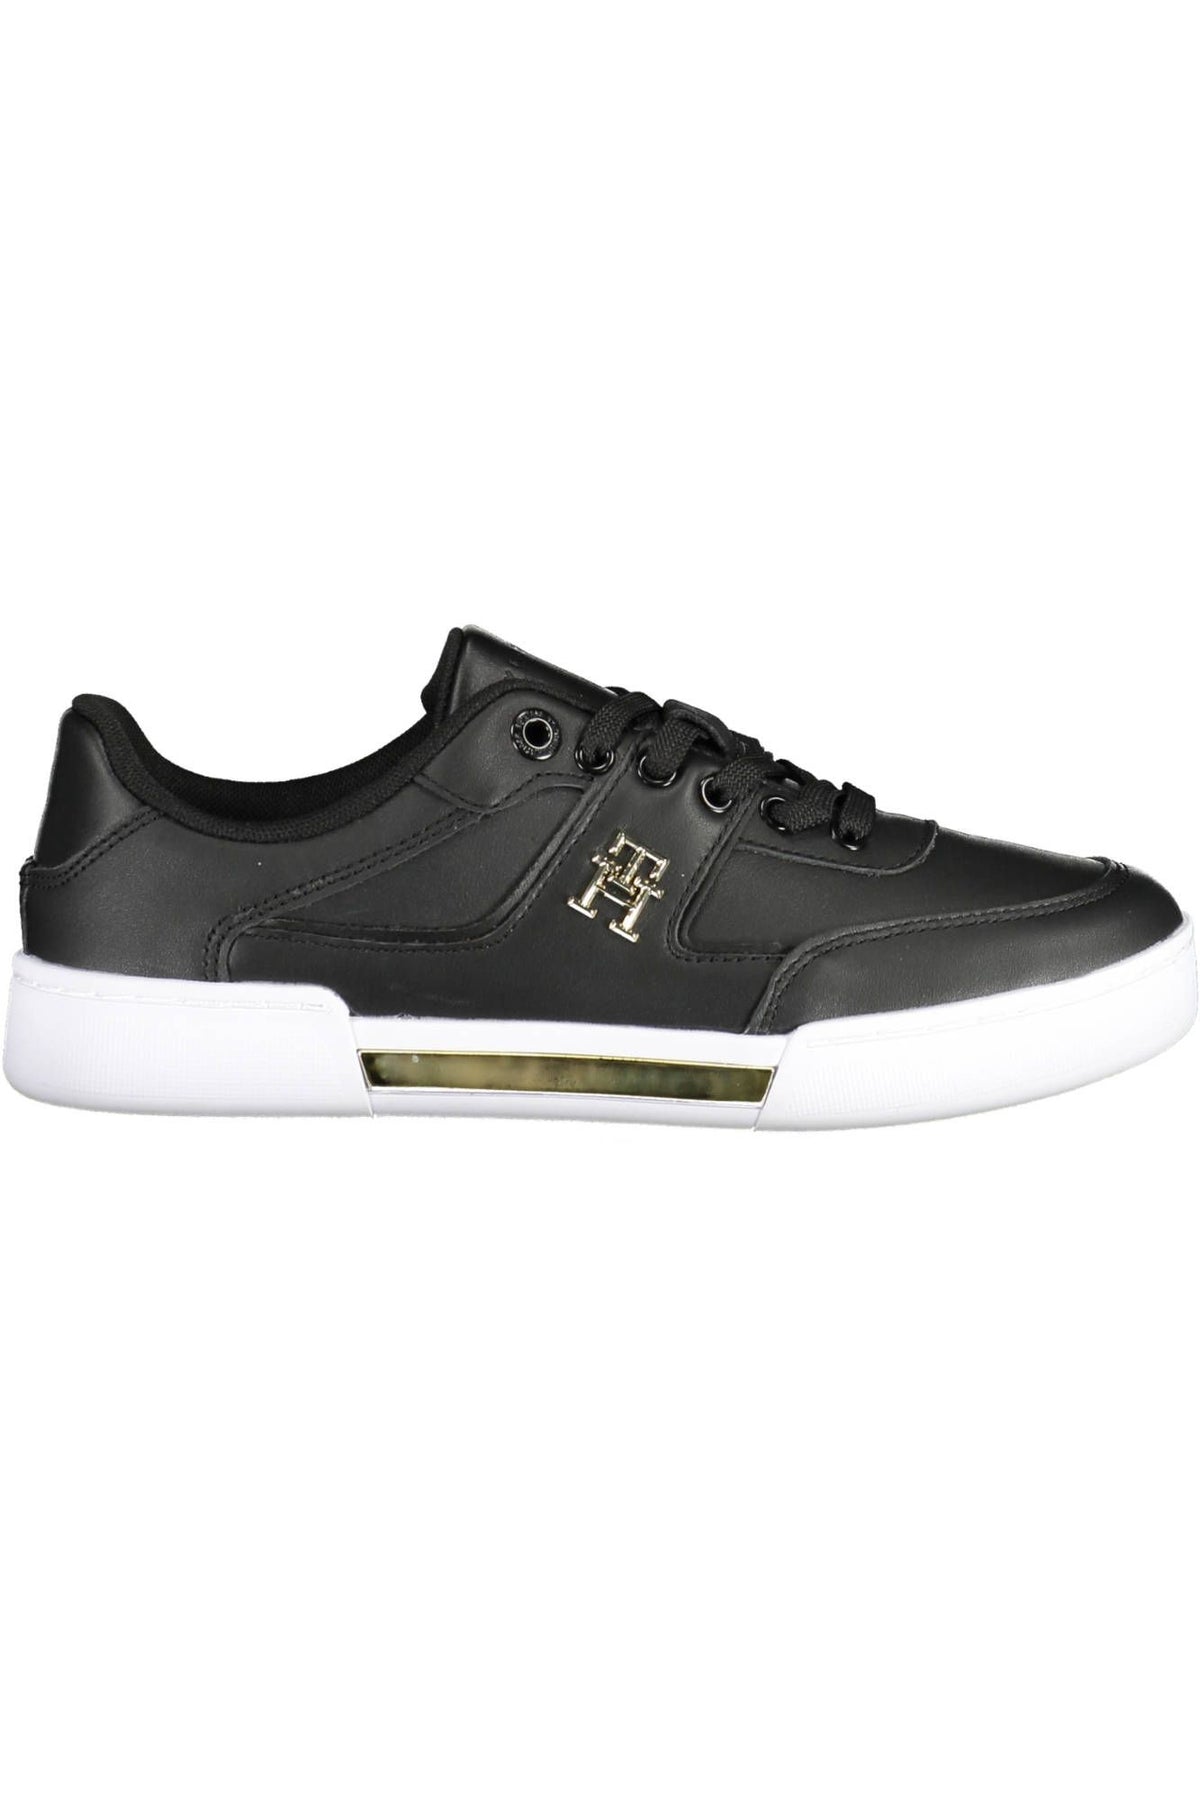 Tommy Hilfiger Chic Black Lace-Up Sneakers with Contrasting Accents